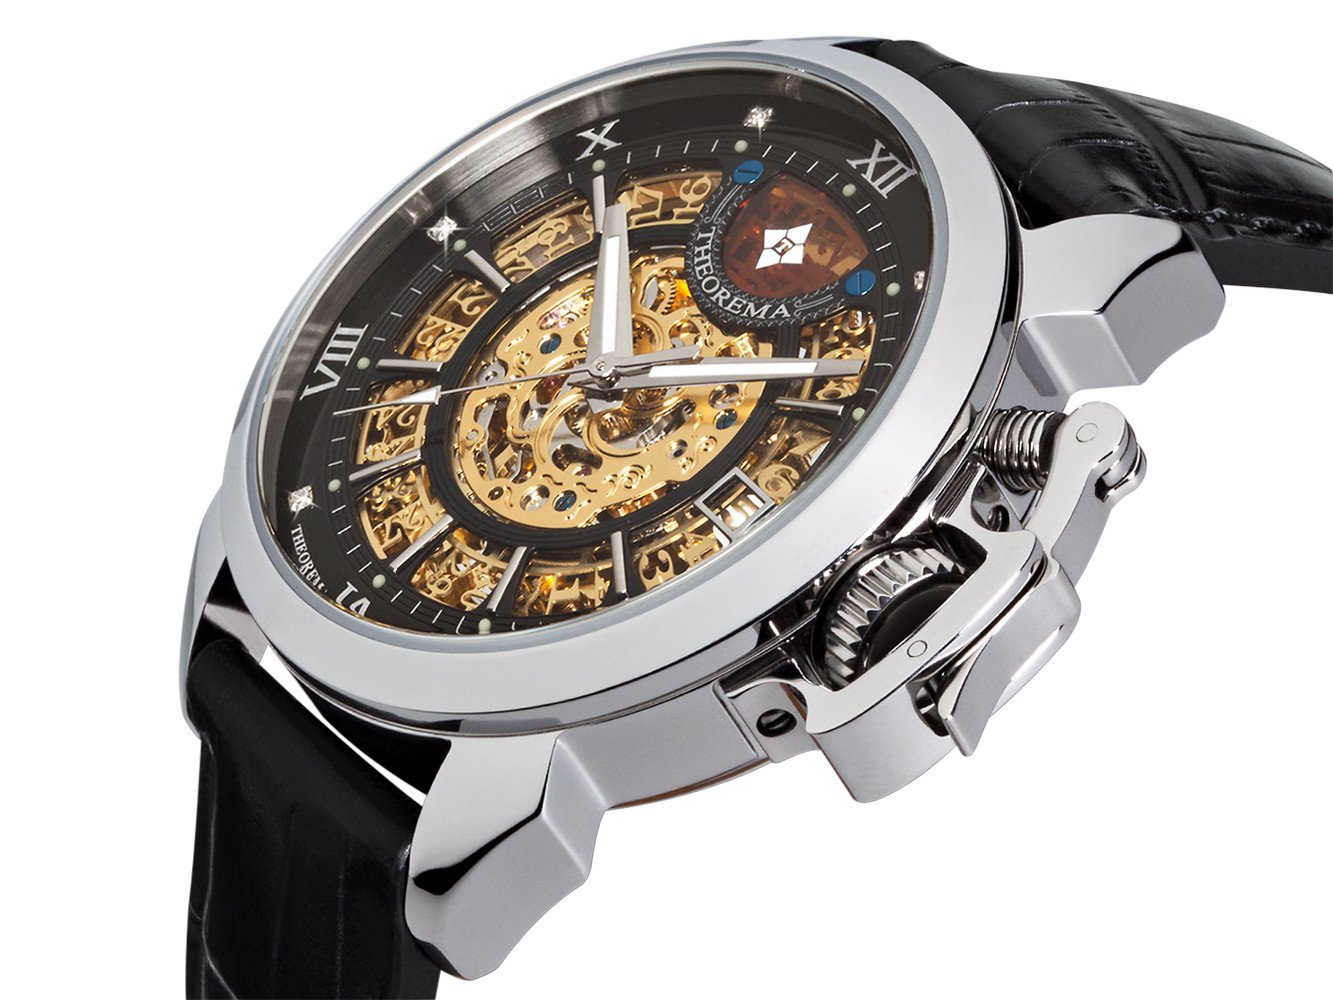 Skeletonized dial with Roman numerals and diamonds as markers for the hour.